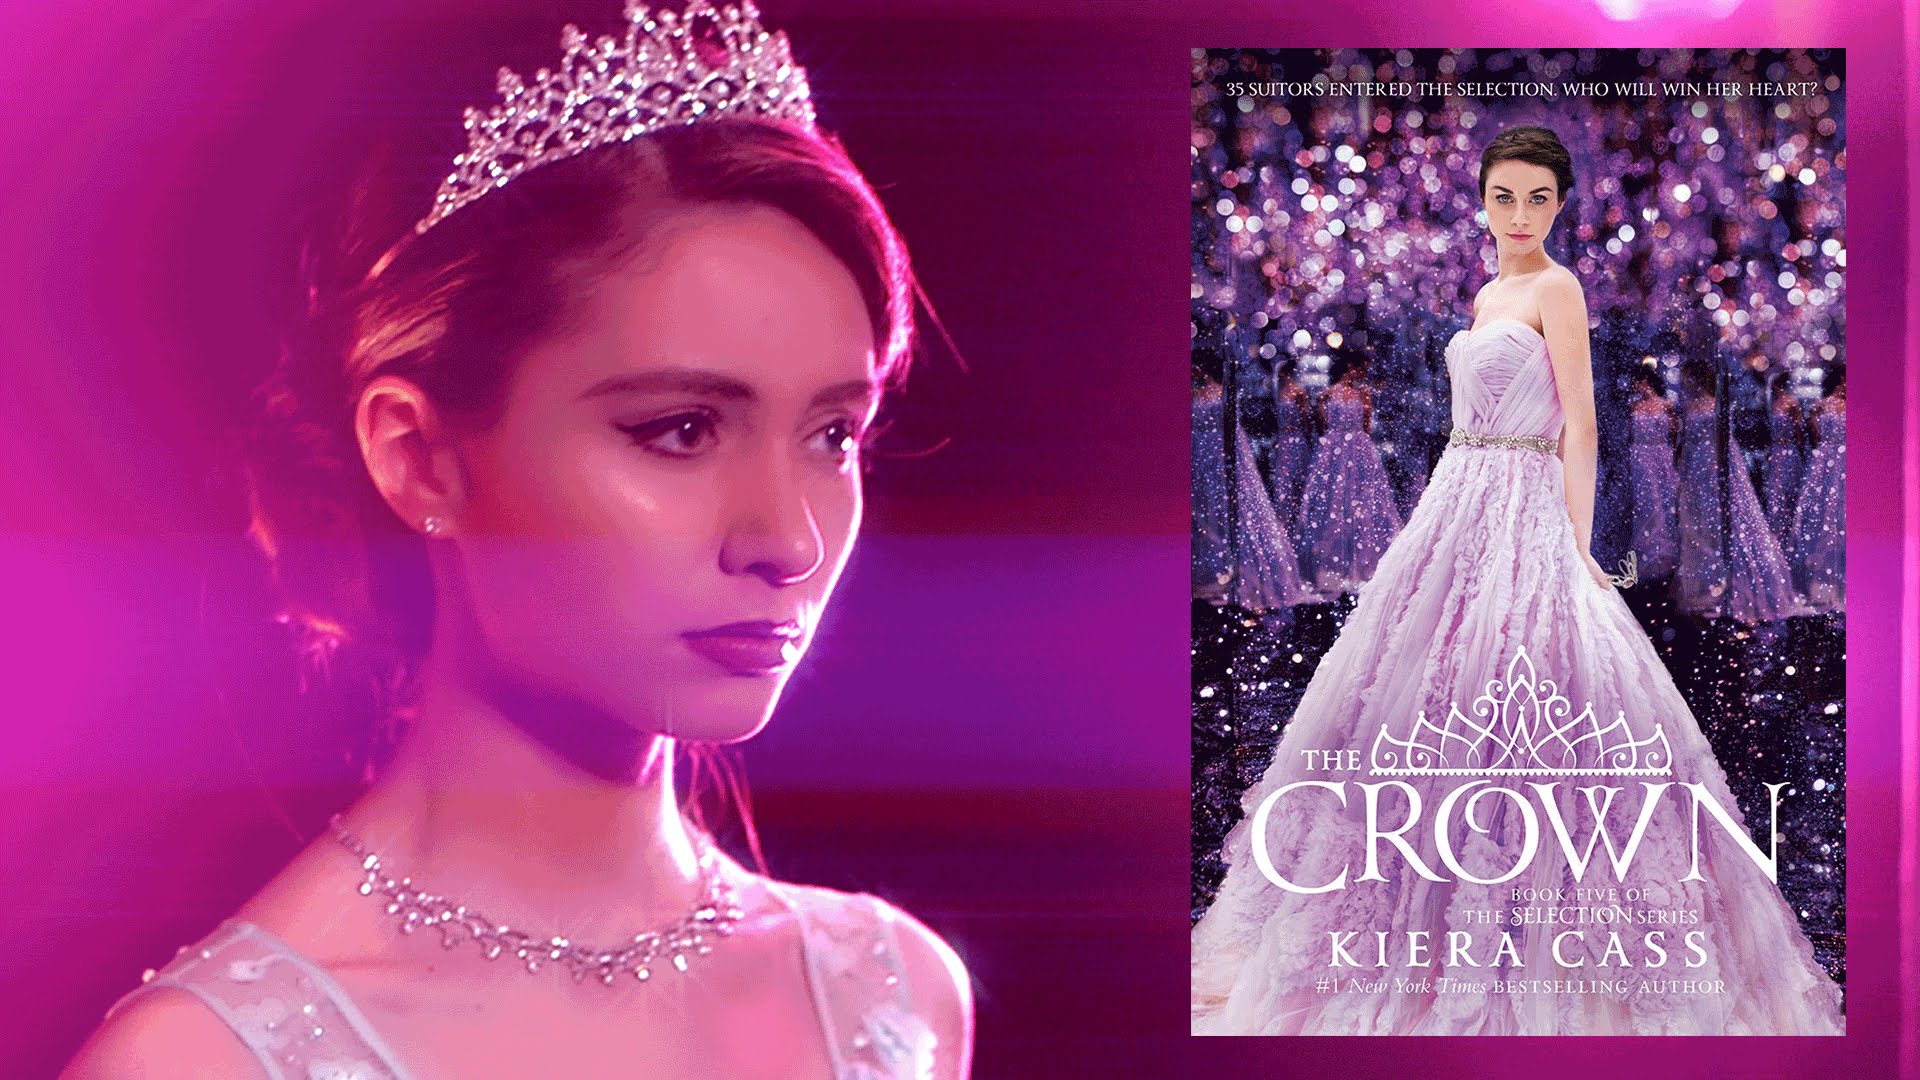 THE CROWN by Kiera Cass | Official Book Trailer | The Selection Series